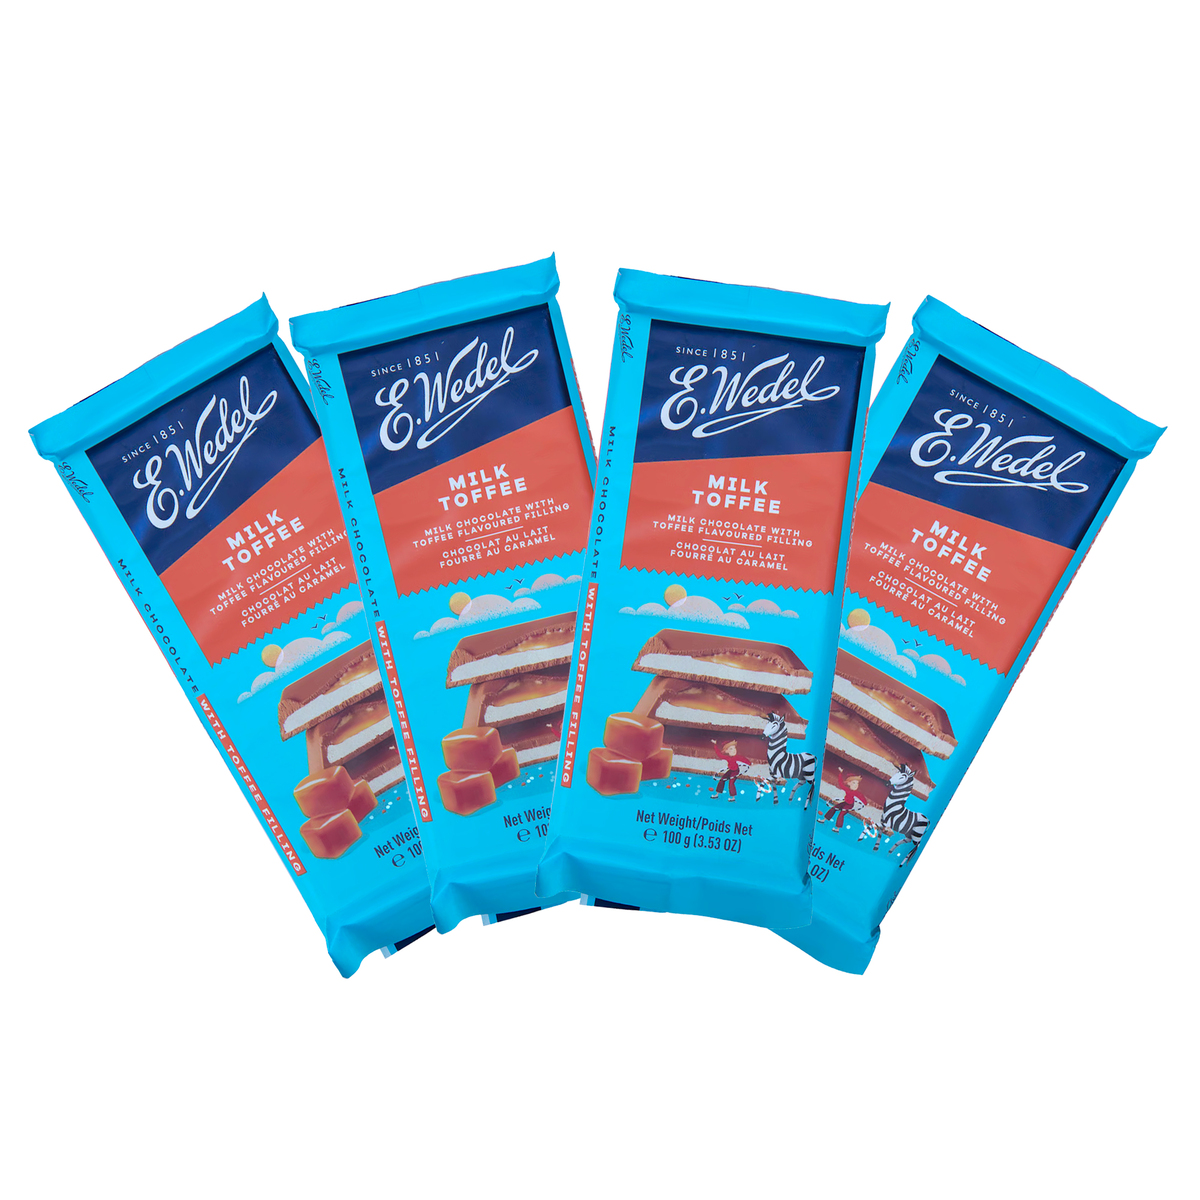 E Wedel Milk Chocolate With Toffee Filling 100 g